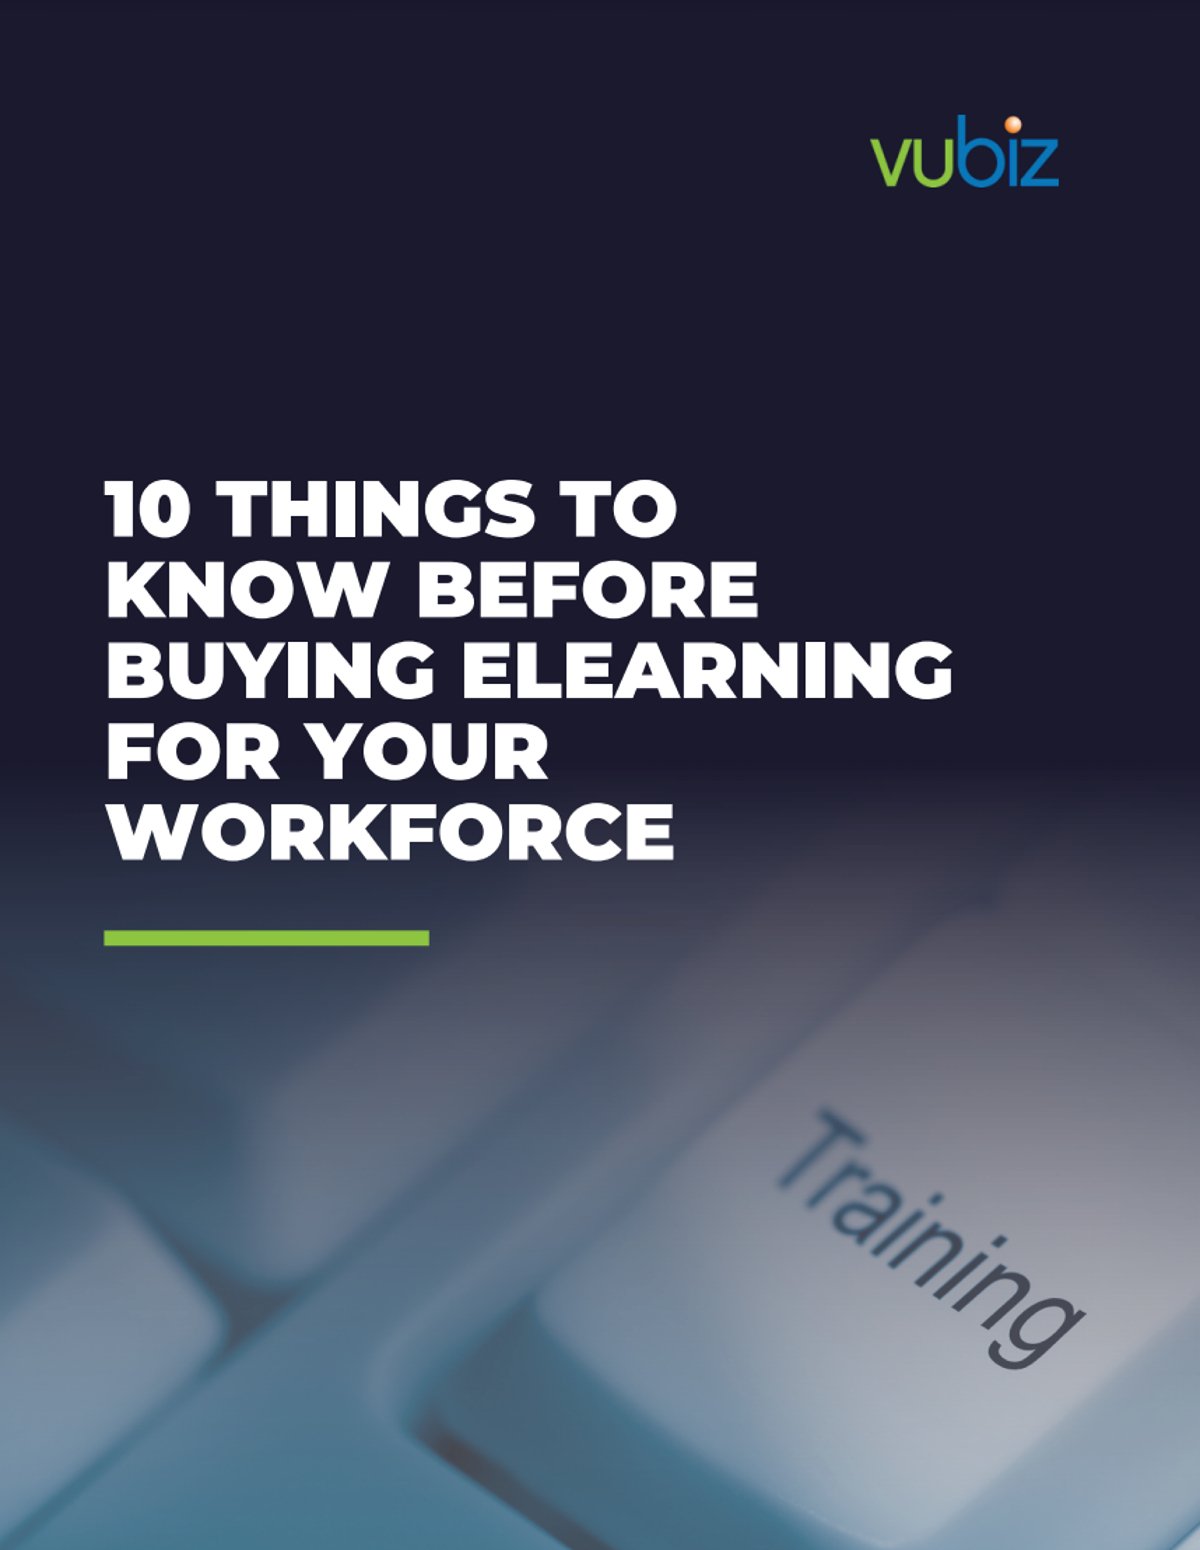 10 Things to Know Before Buying Elearning